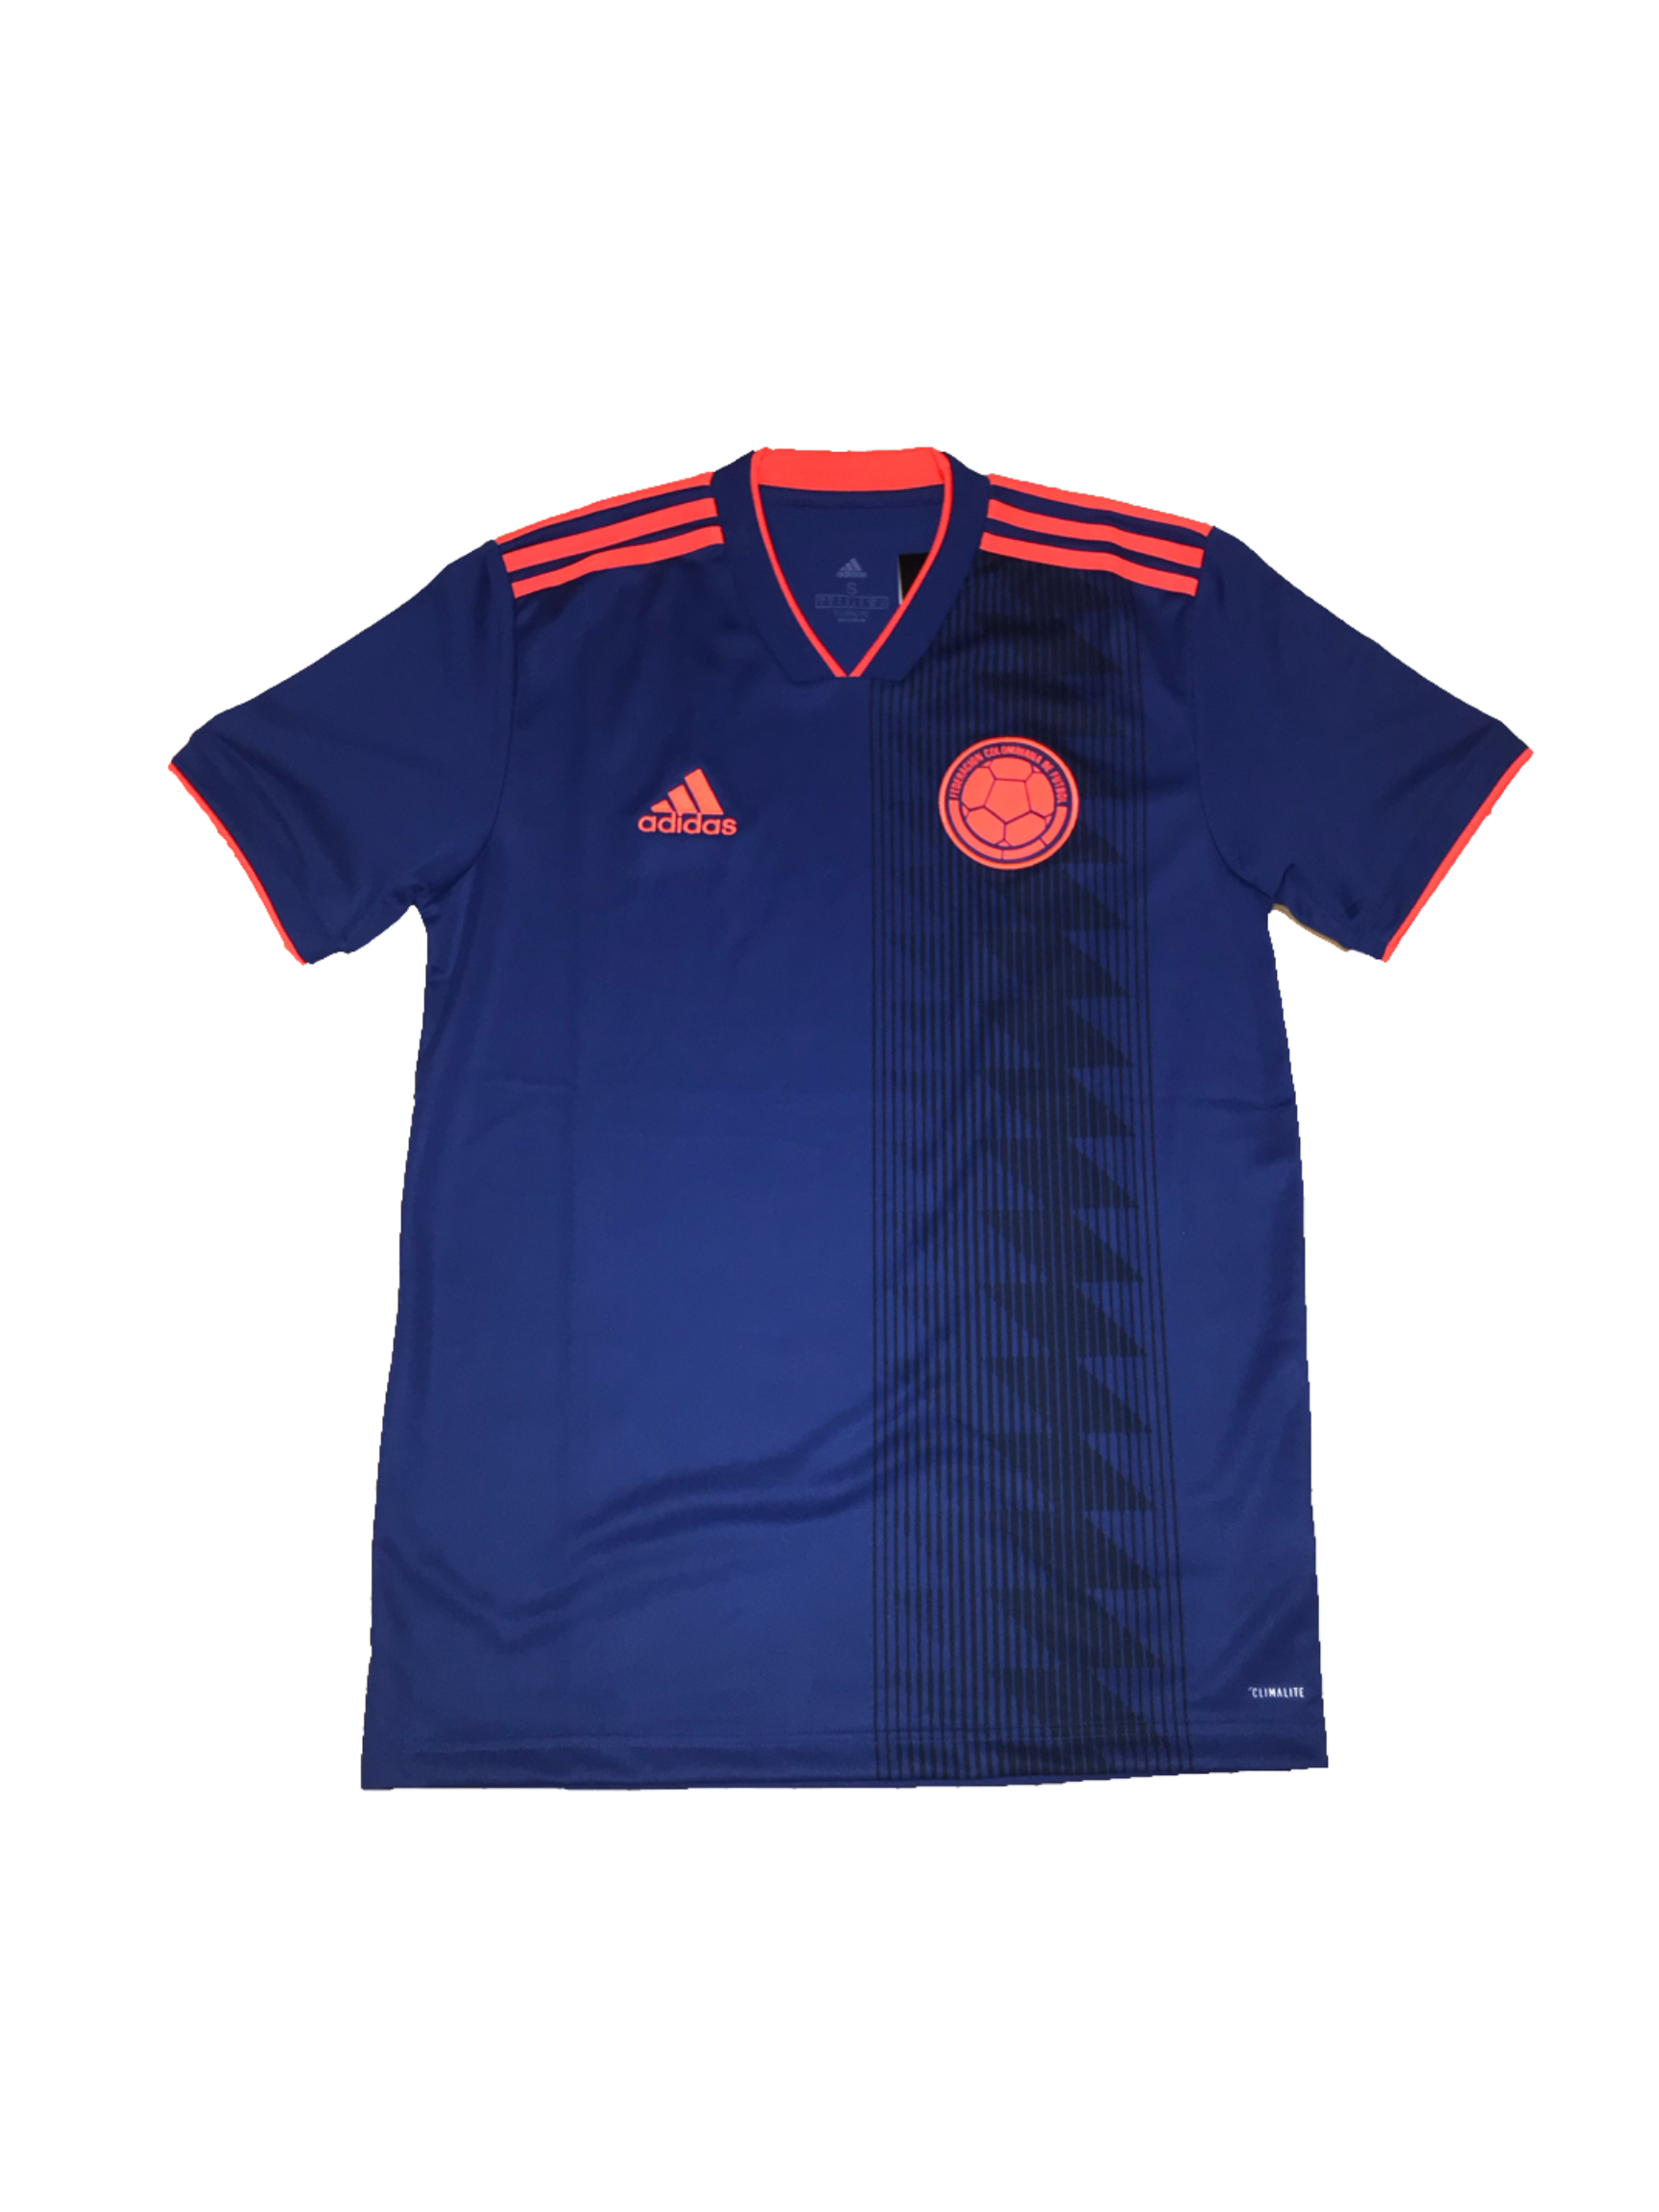 colombia 2018 shirt